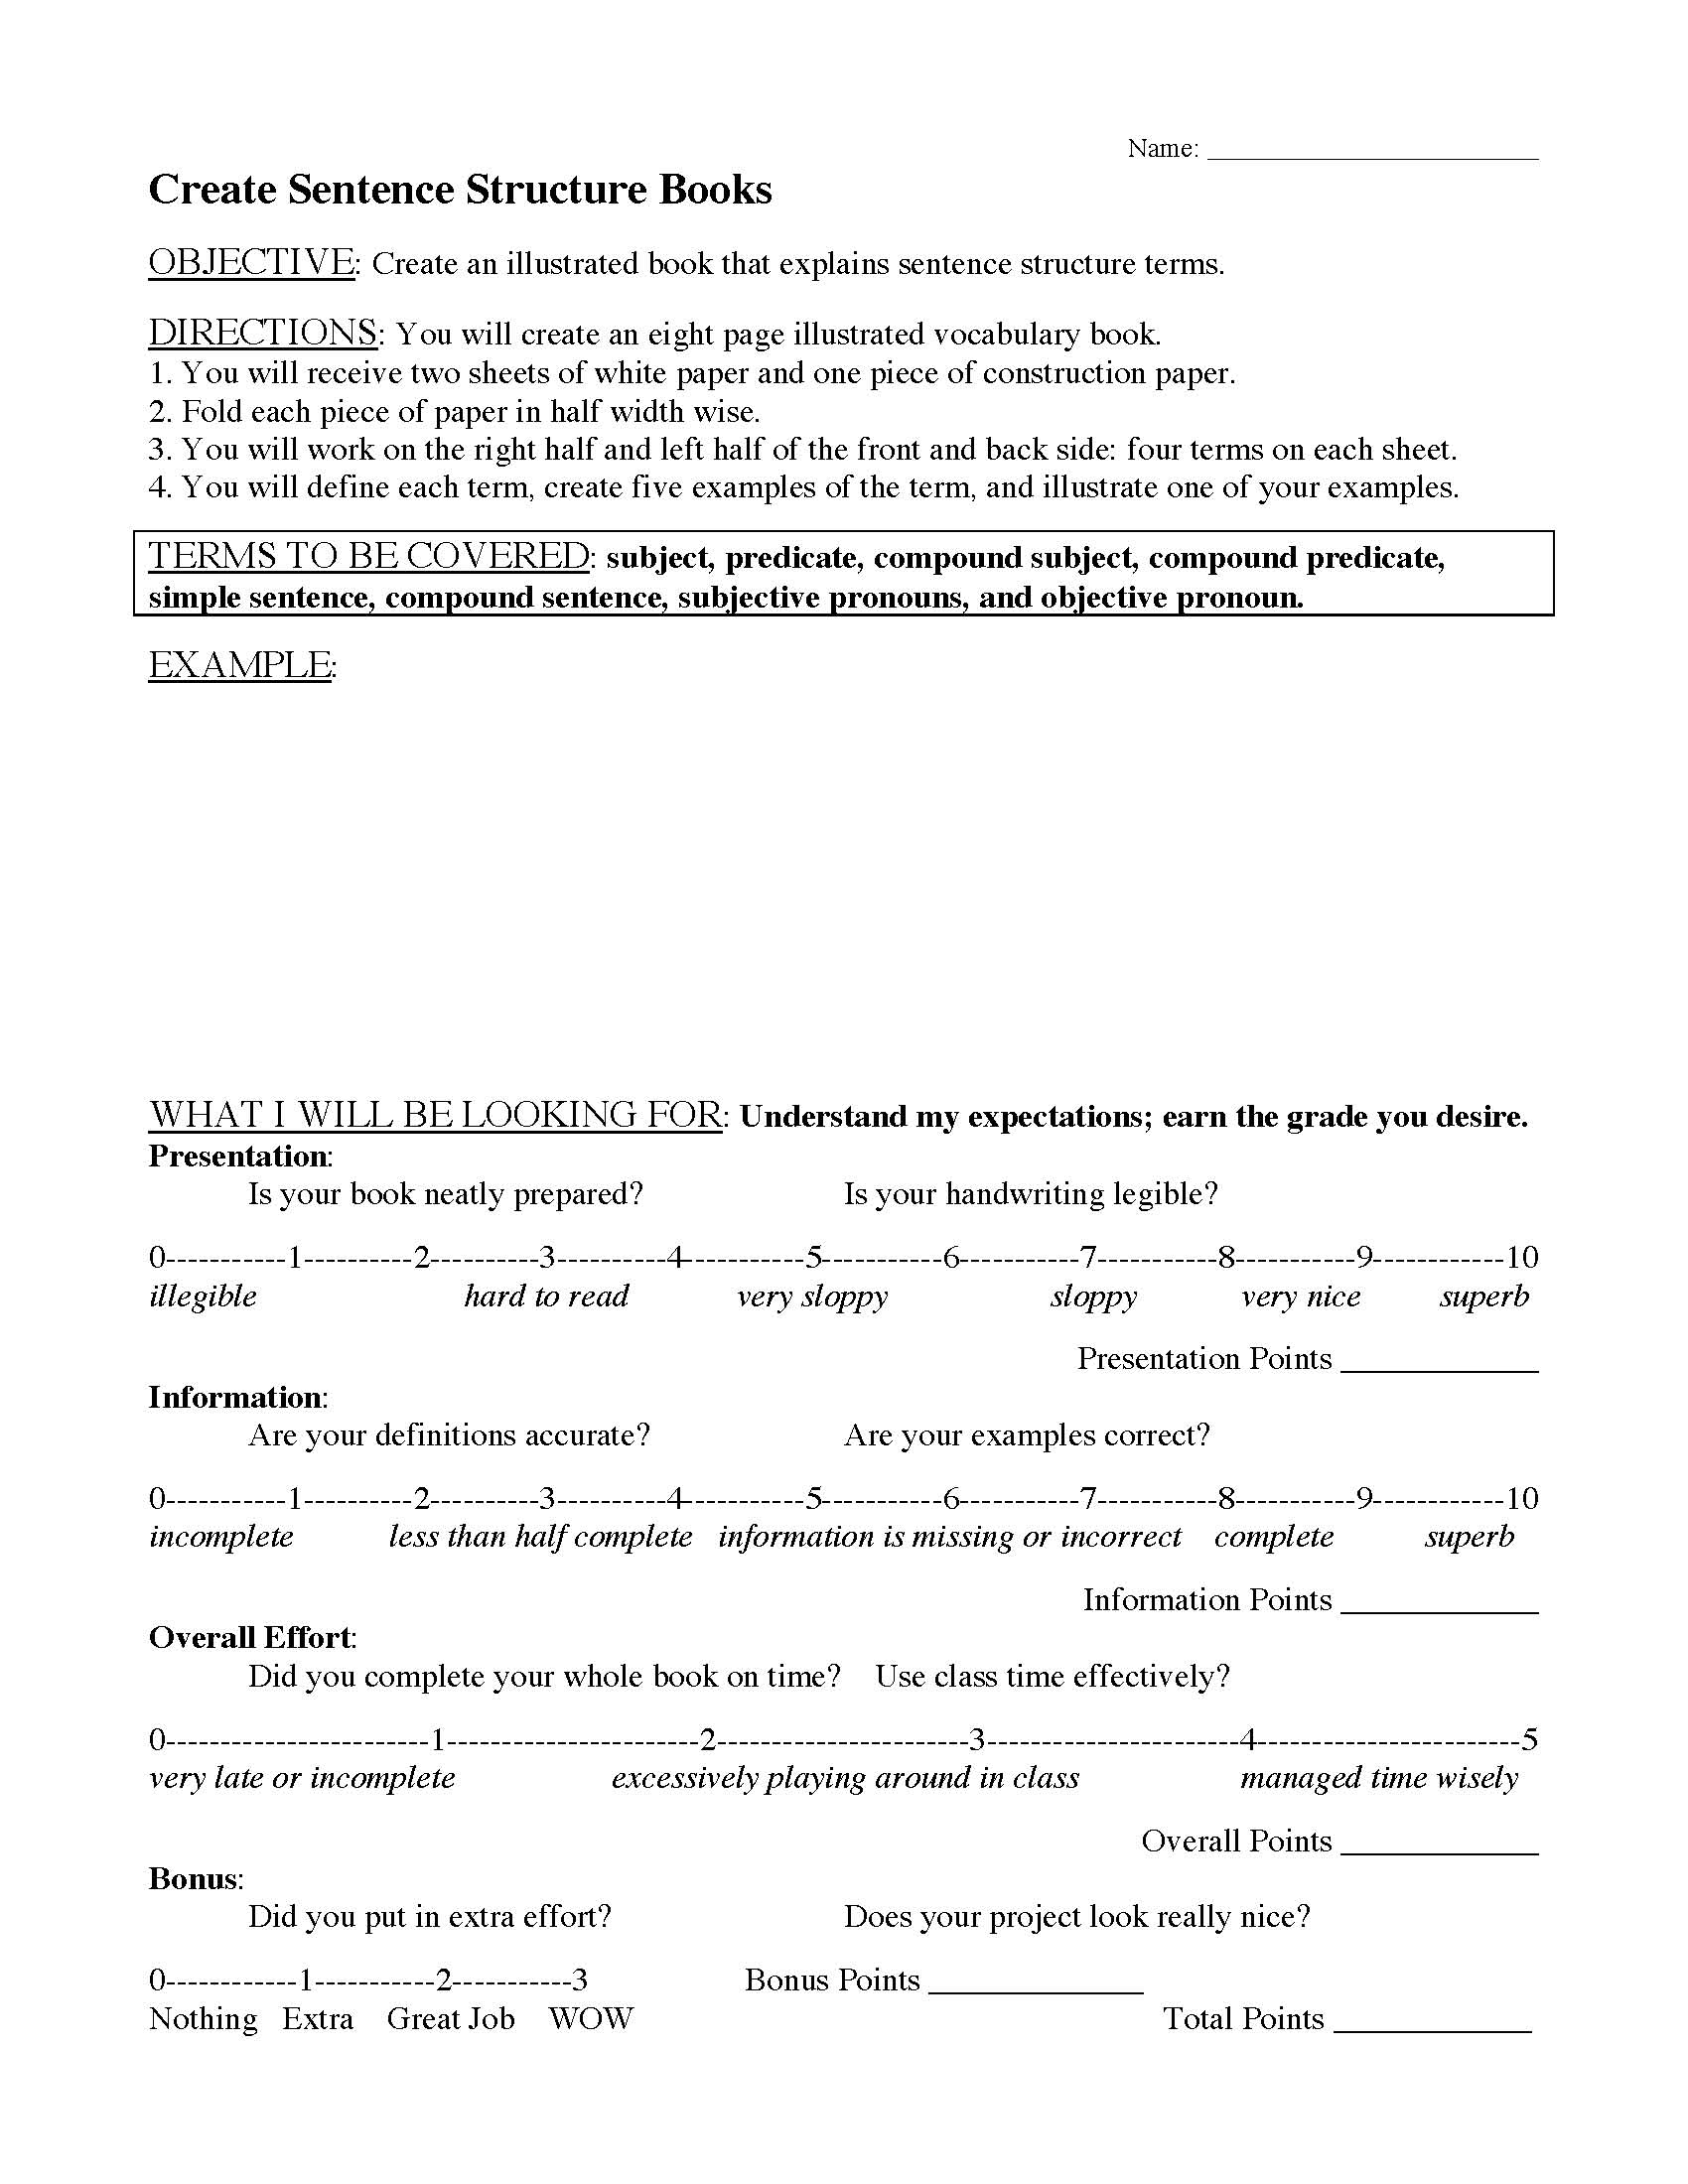 This is a preview image of Sentence Structure Booklet Project. Click on it to enlarge it or view the source file.